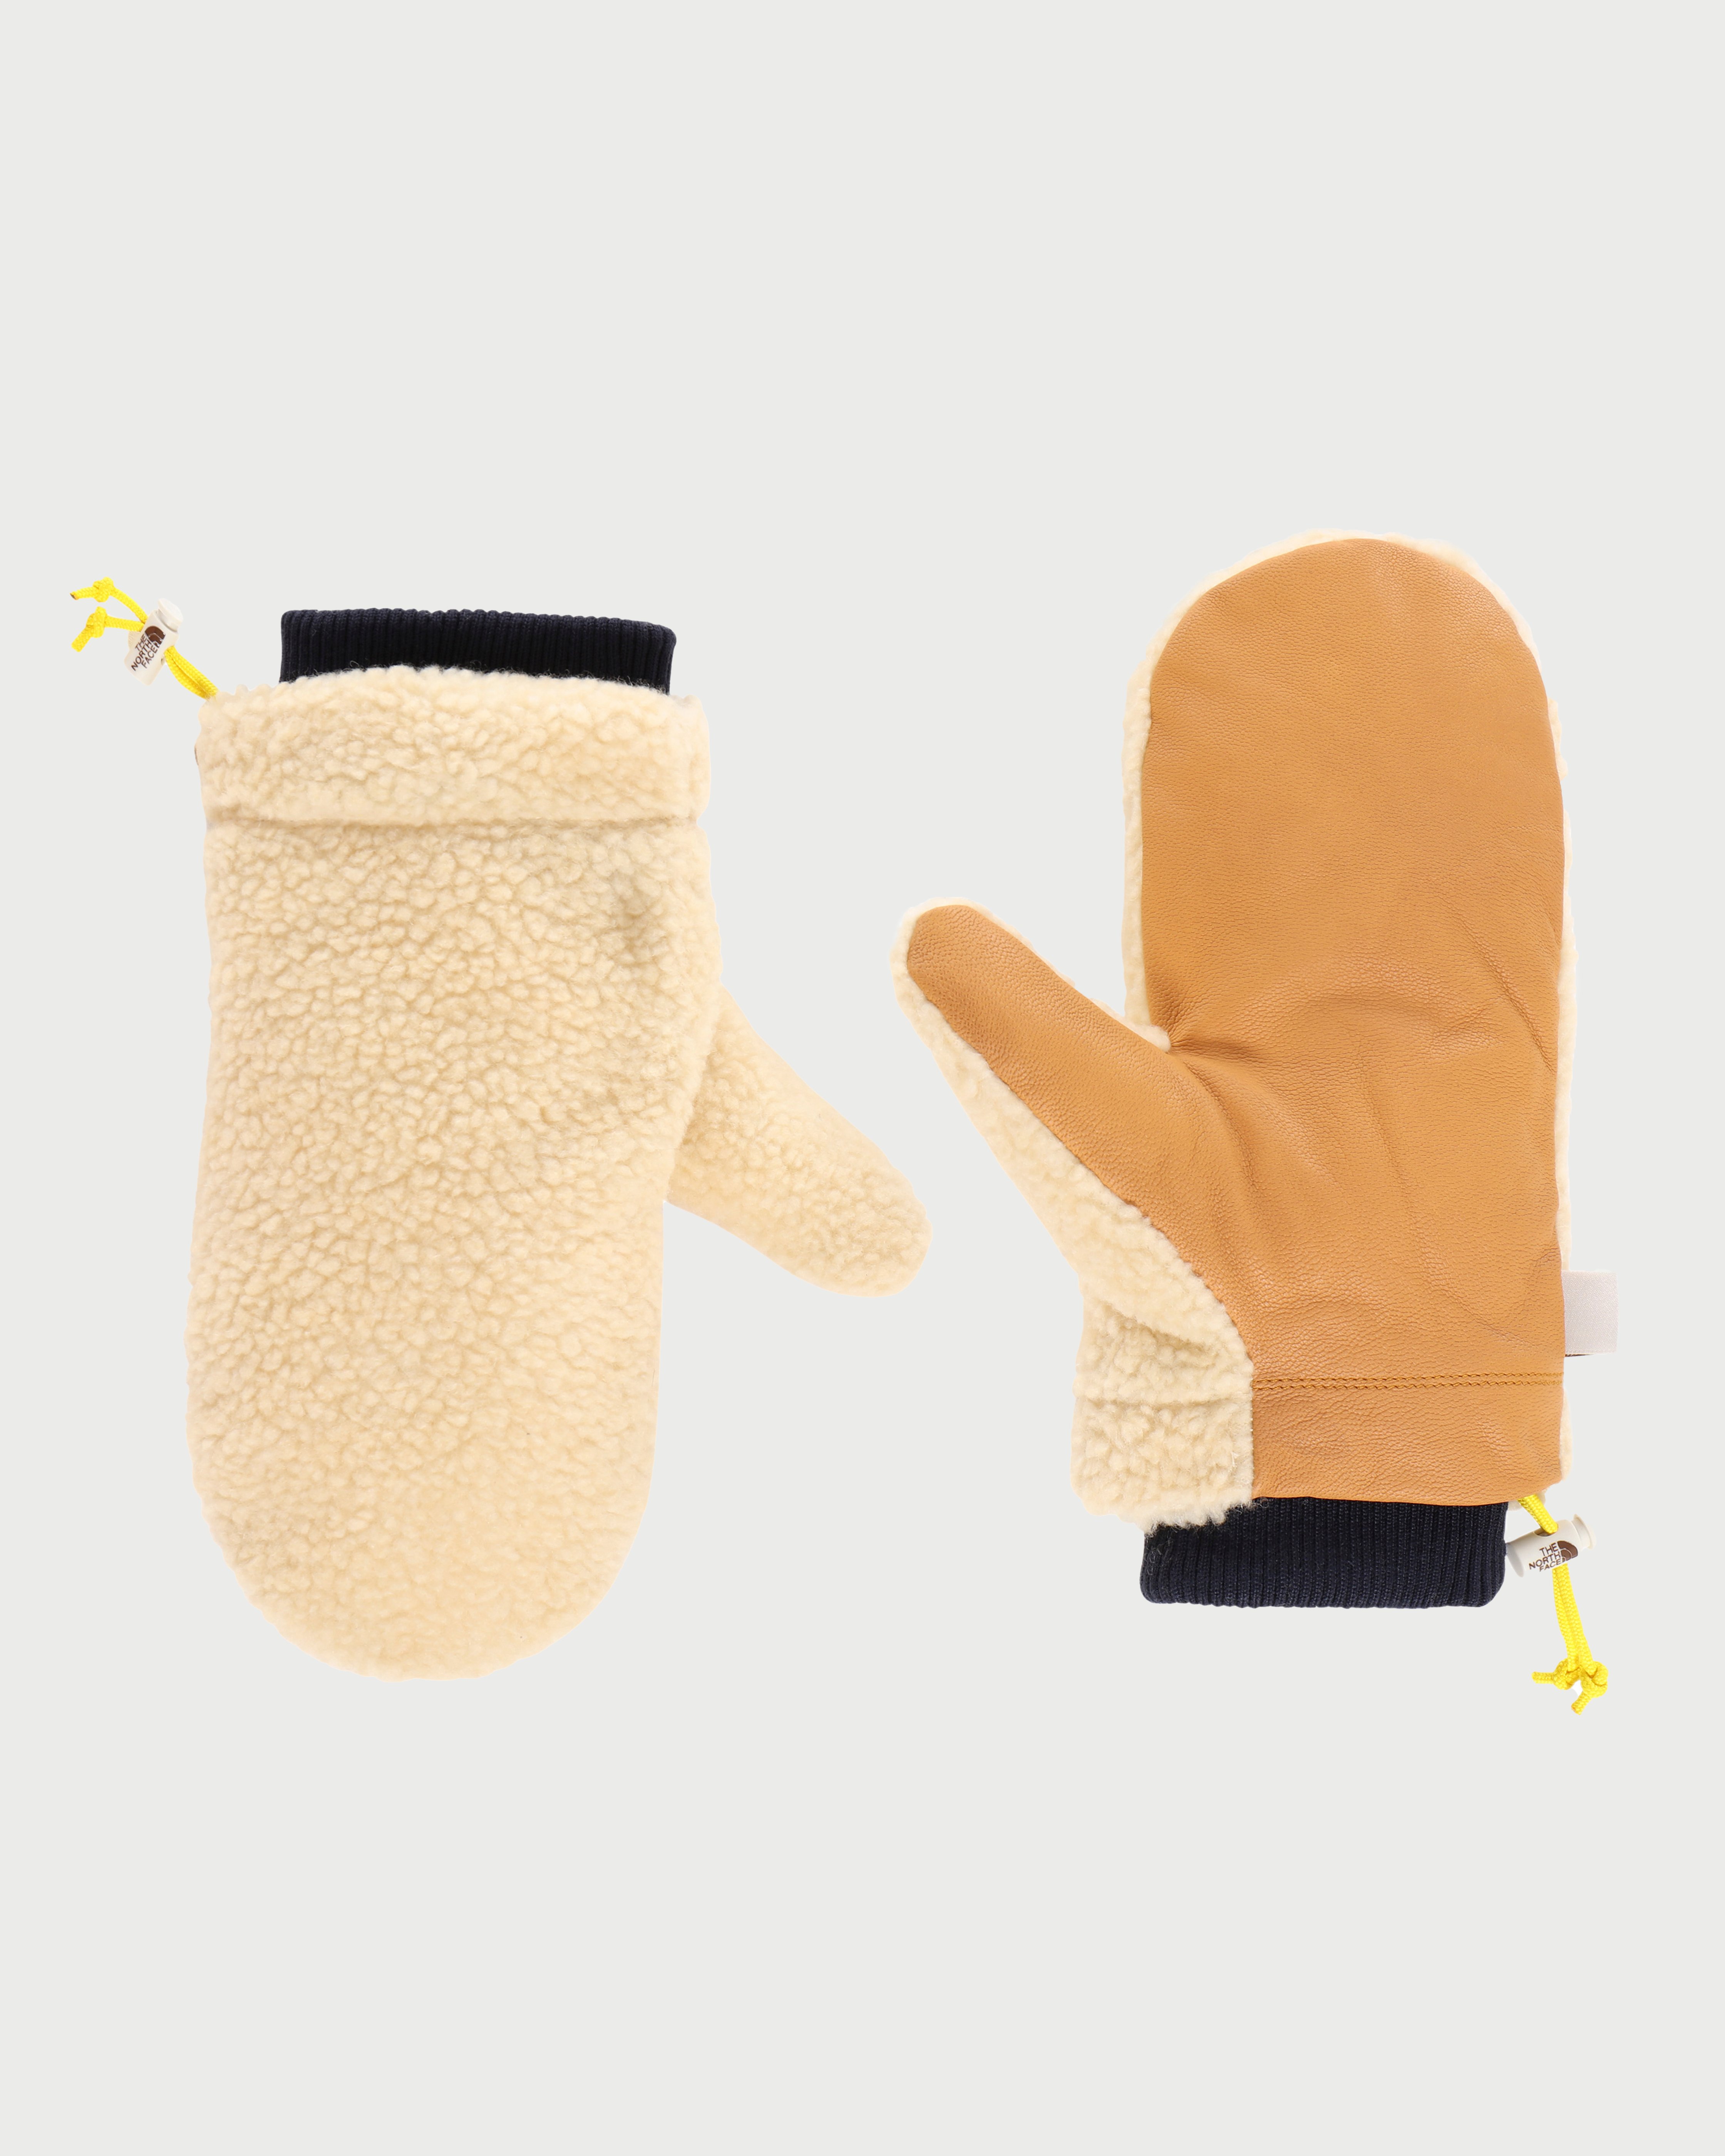 The North Face - Brown Label Knit Gloves Bleached Sand Unisex - Accessories - Yellow - Image 1